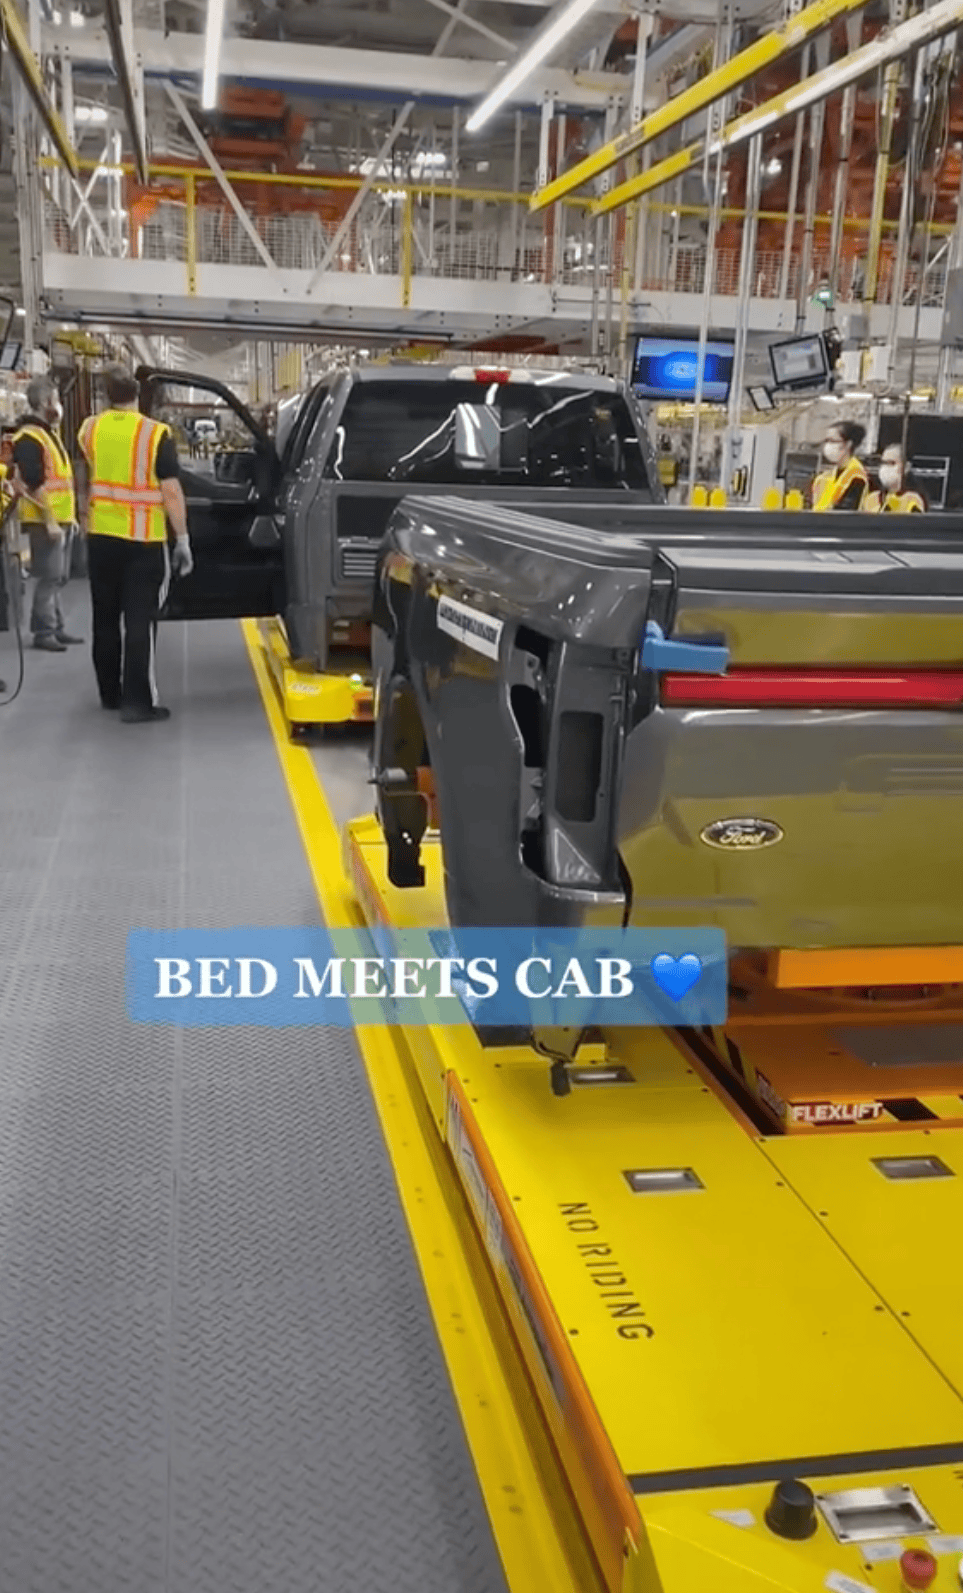 Ford F-150 Lightning F-150 Lightning Production Assembly Plant Video Shared by Ford on Tiktok f150 lightning production assembly line plant 5